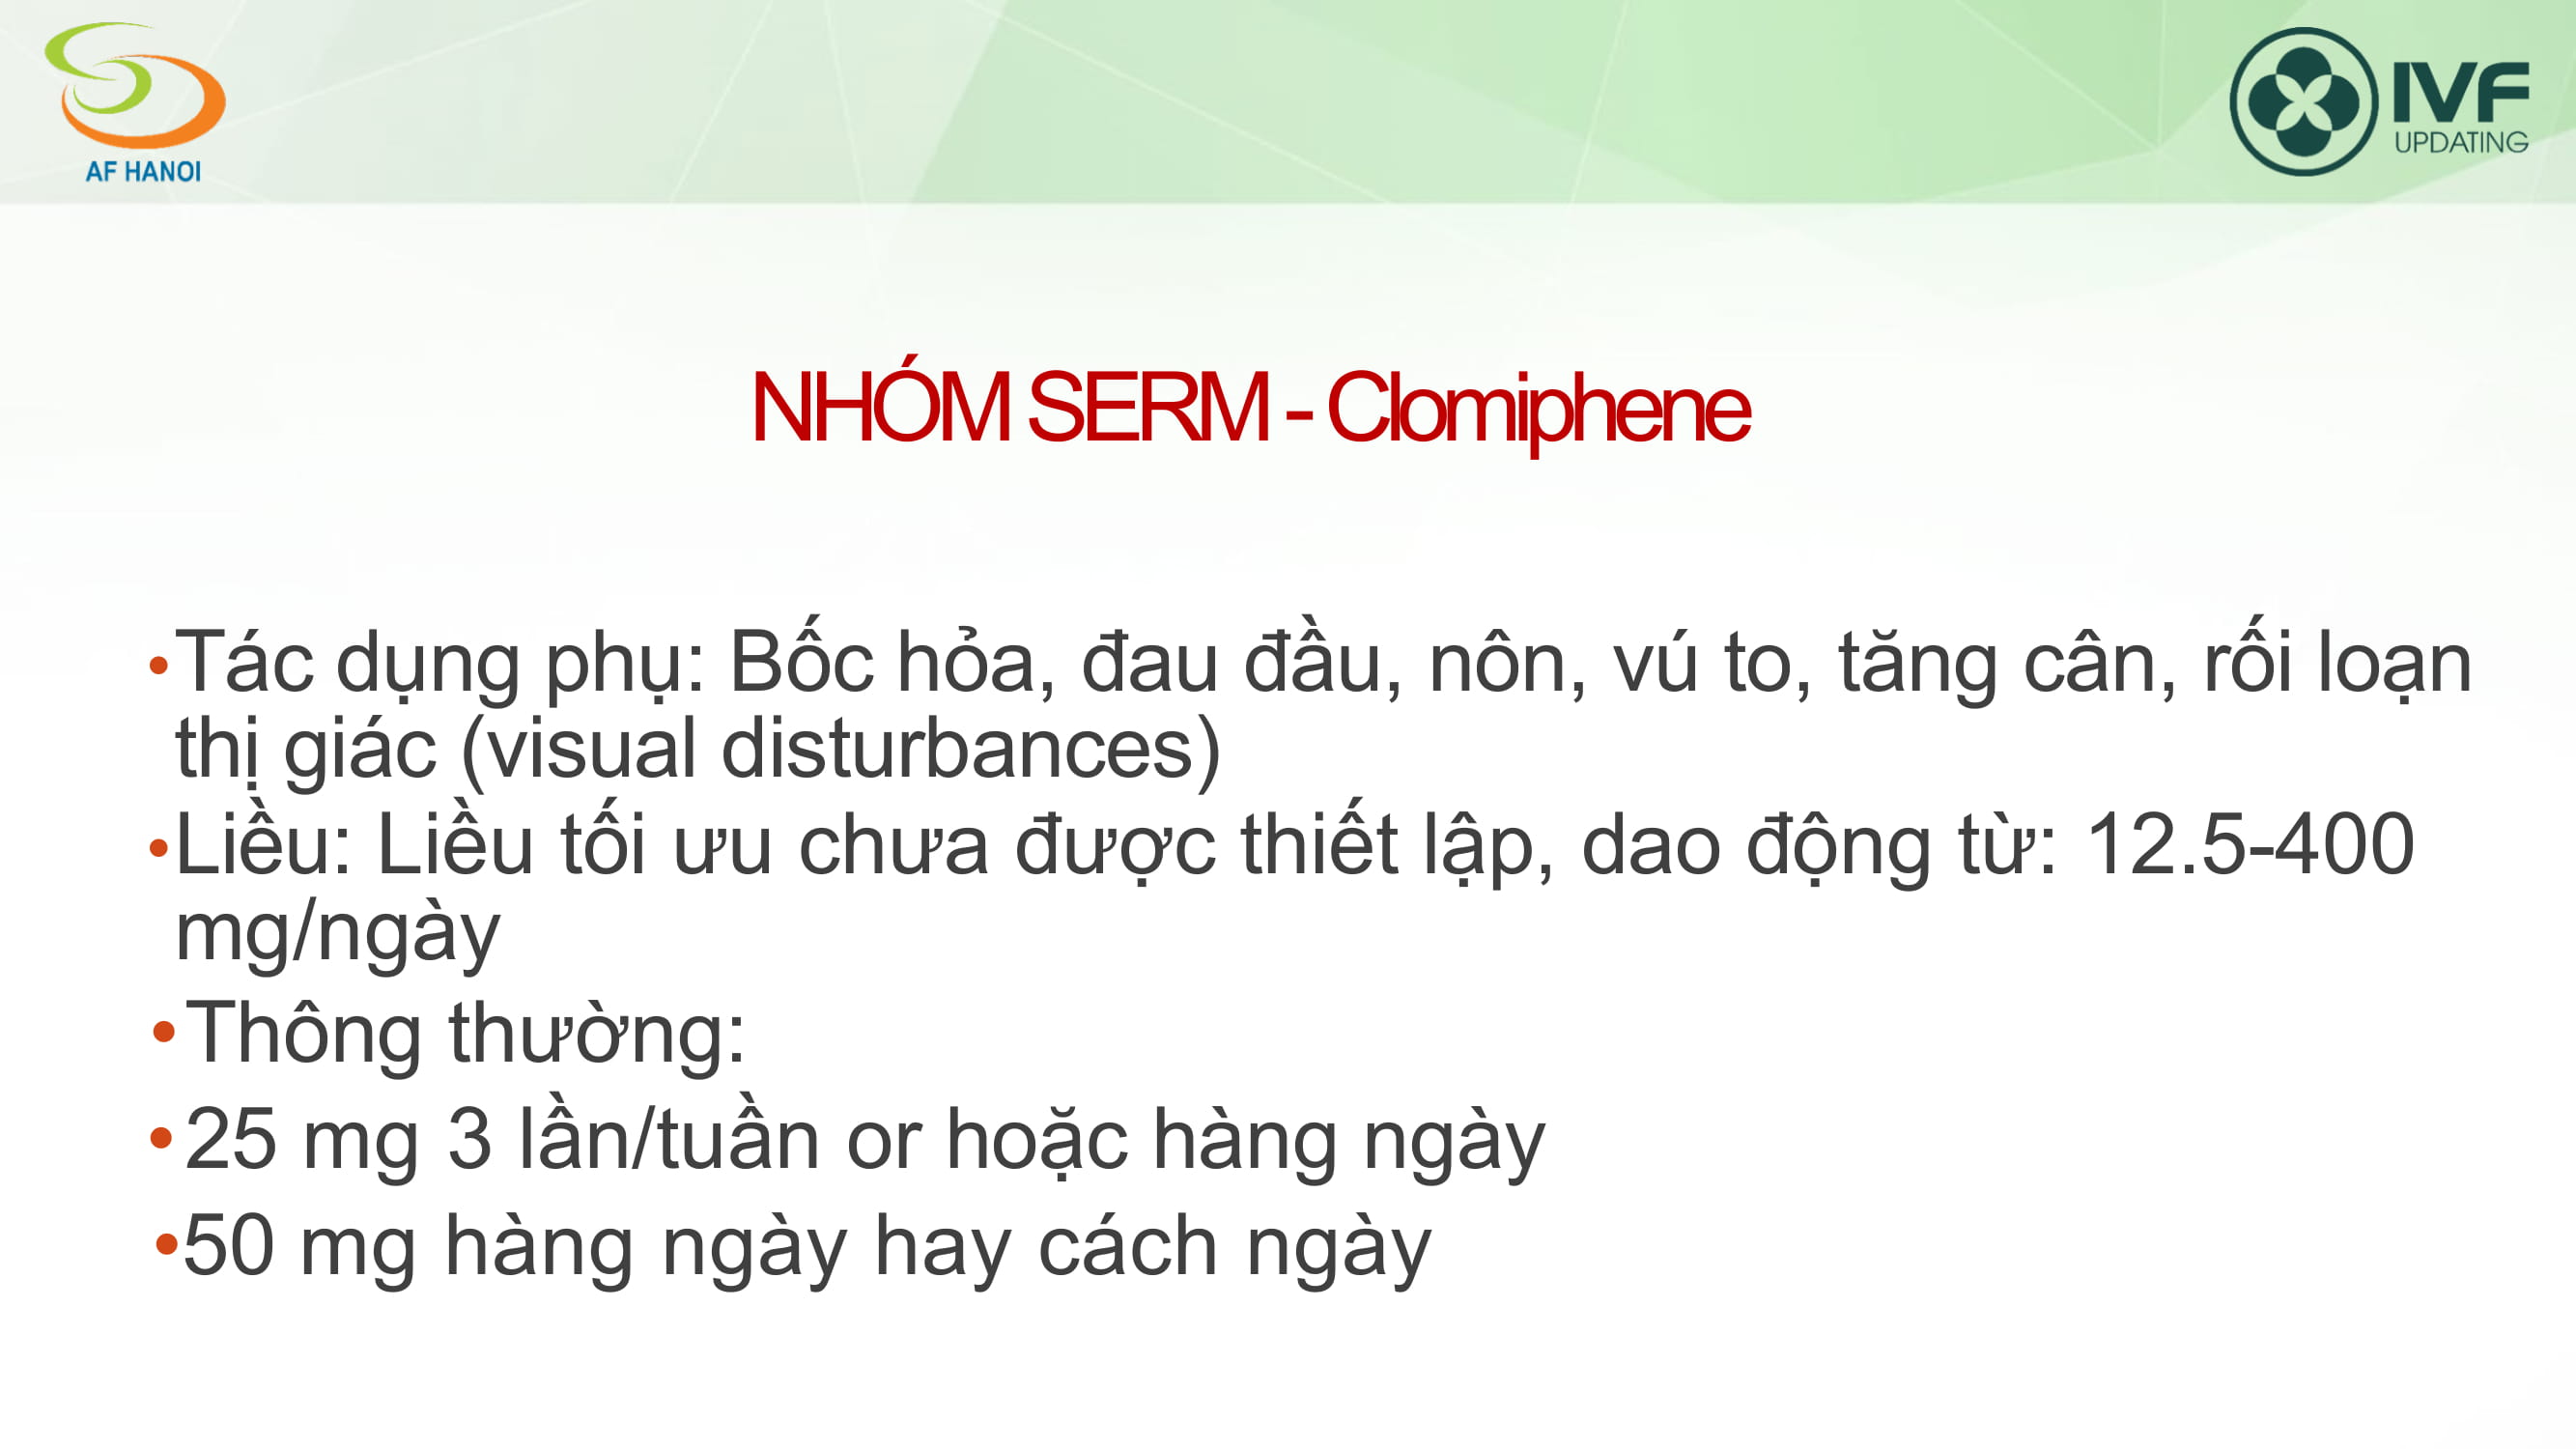 BS Nguyen Ba Hung - Chi dinh thuoc kich thich sinh tinh1-36